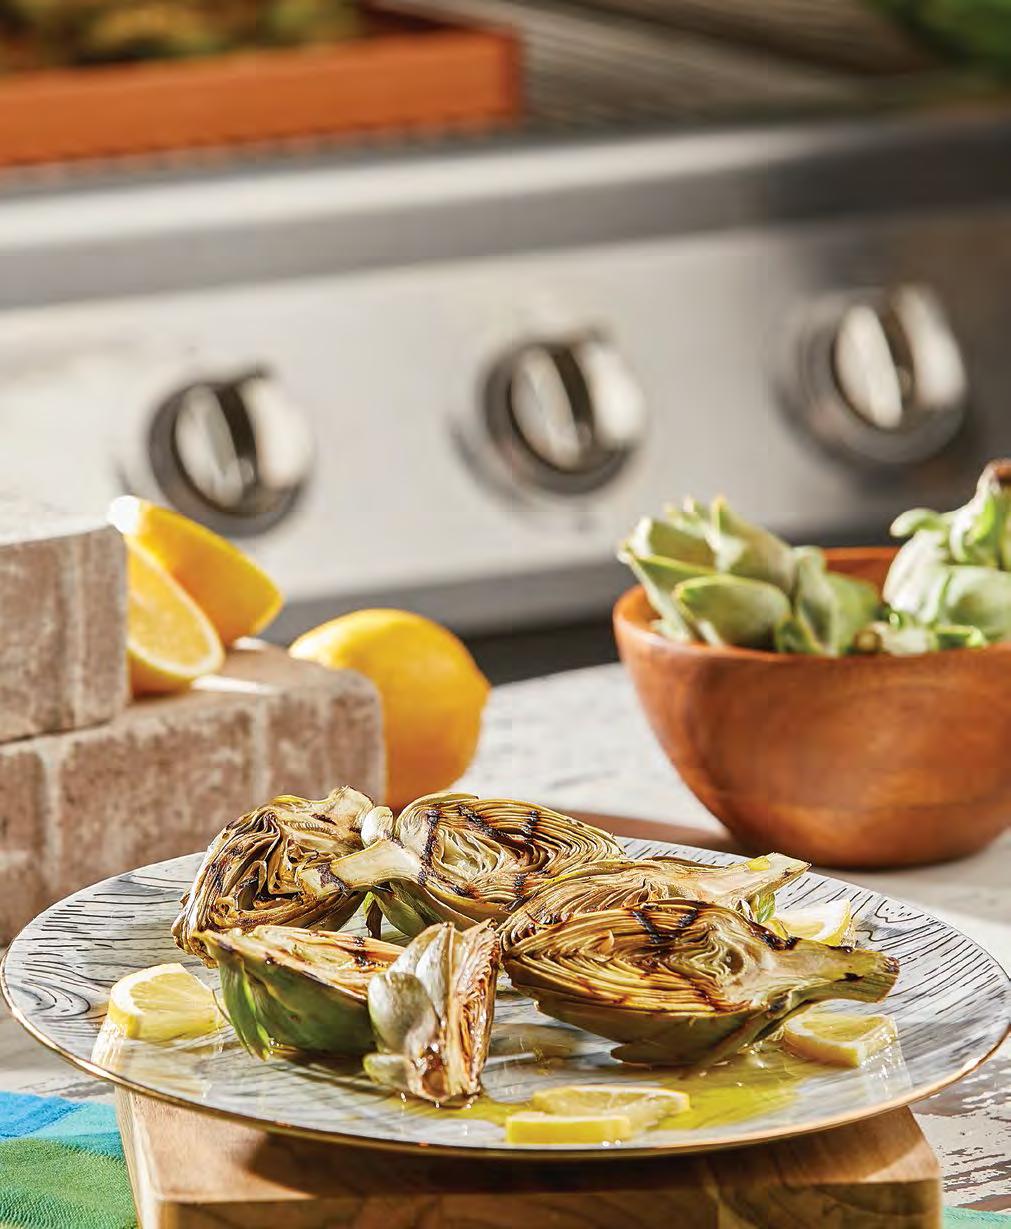 Grilled Baby Artichokes 6 baby artichokes, cut in half 3 cloves garlic, sliced thinly zest & juice of 2 lemons ¾ cup extra virgin olive oil 1 tsp. sea salt ½ tsp.